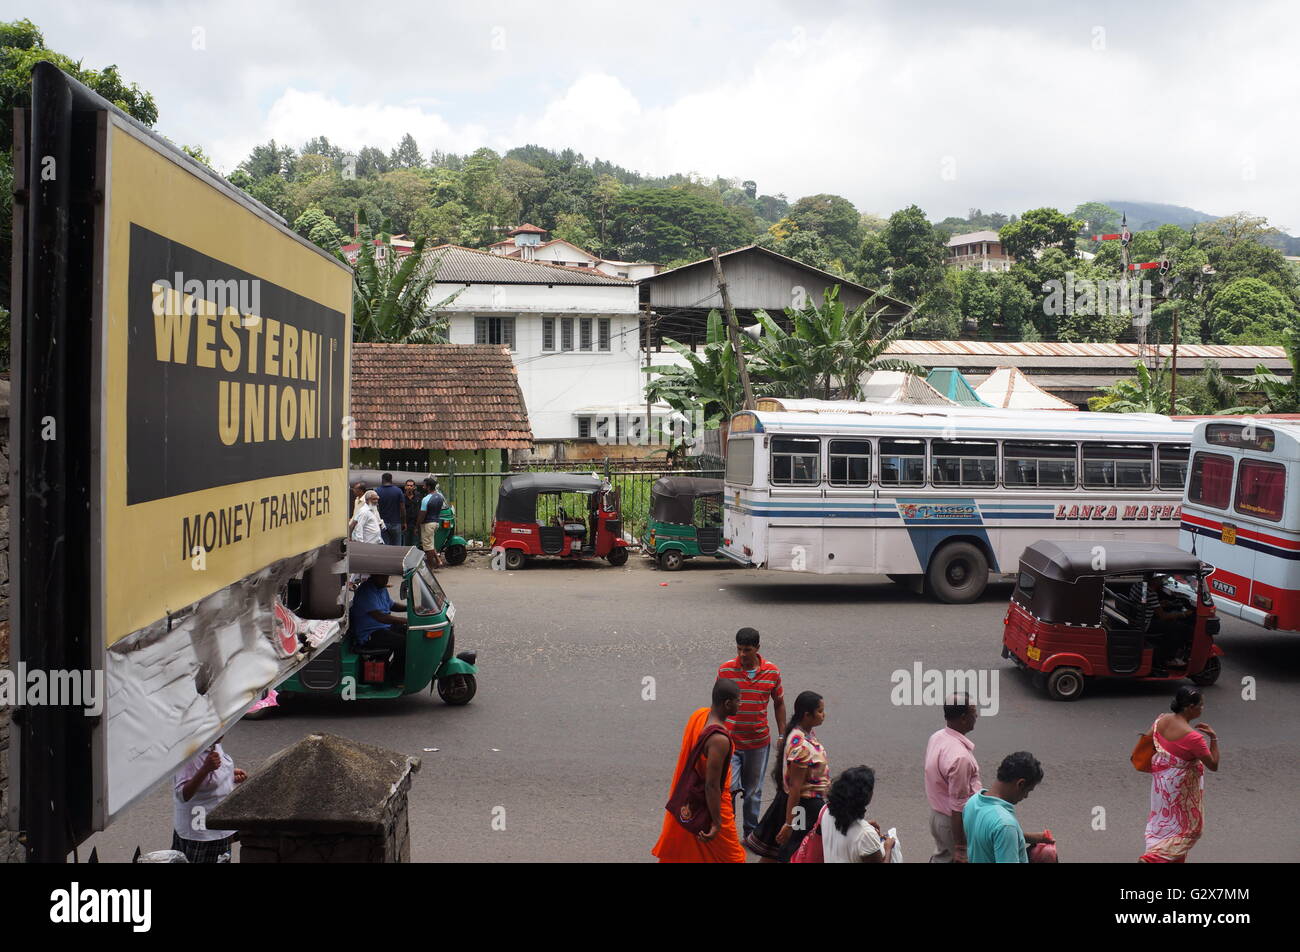 A Western Union signboard in front of Kandy Central Post Office, Sri Lanka. Stock Photo